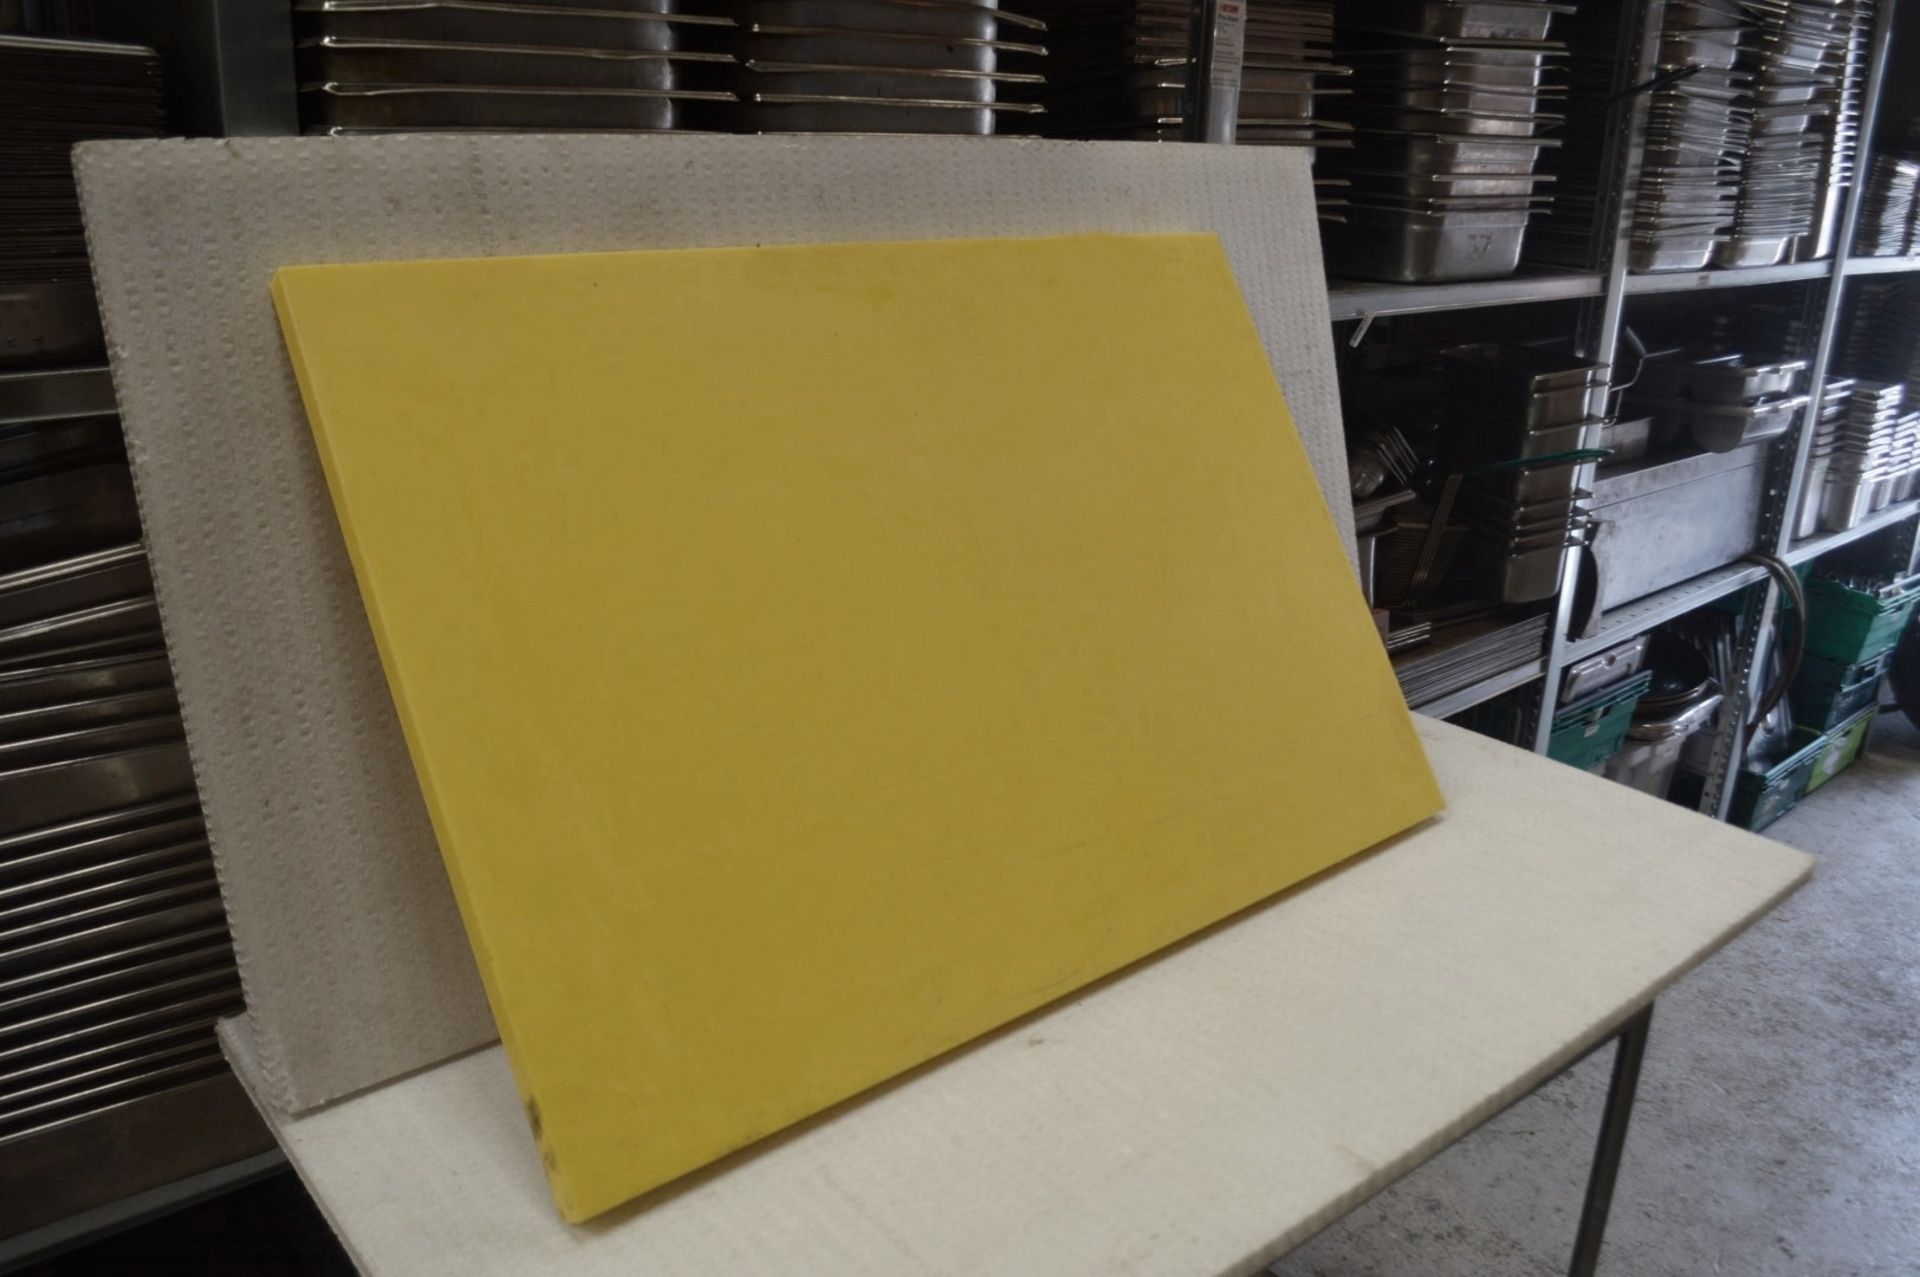 1 x Large Commercial Chopping / Preparation Board - Hygenic and Colour Coded Yellow - Dimensions: - Image 3 of 3